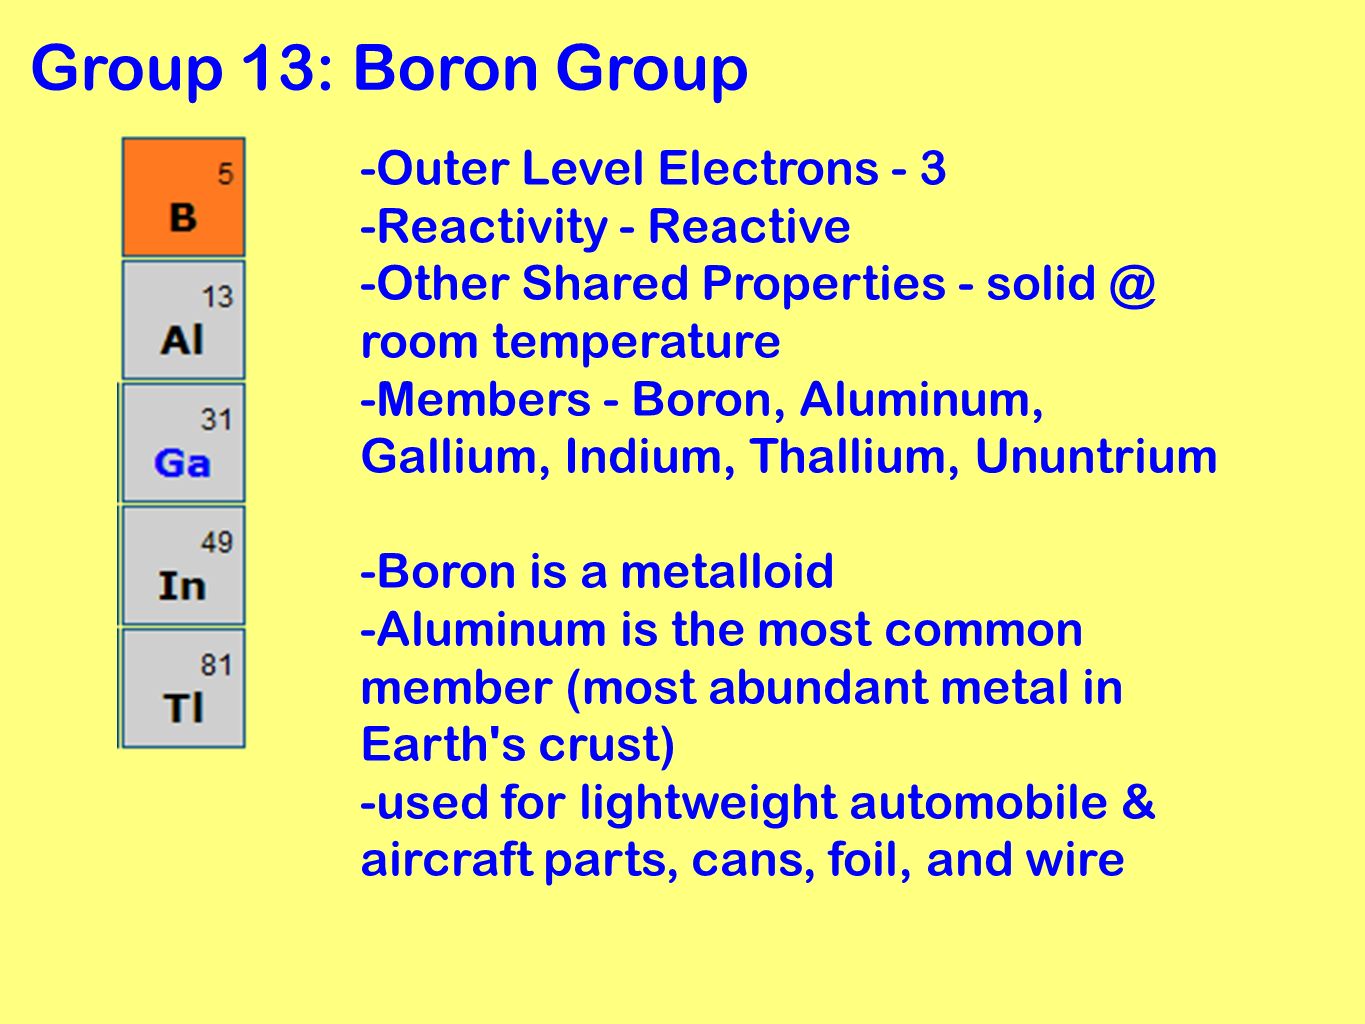 The Element Group 46